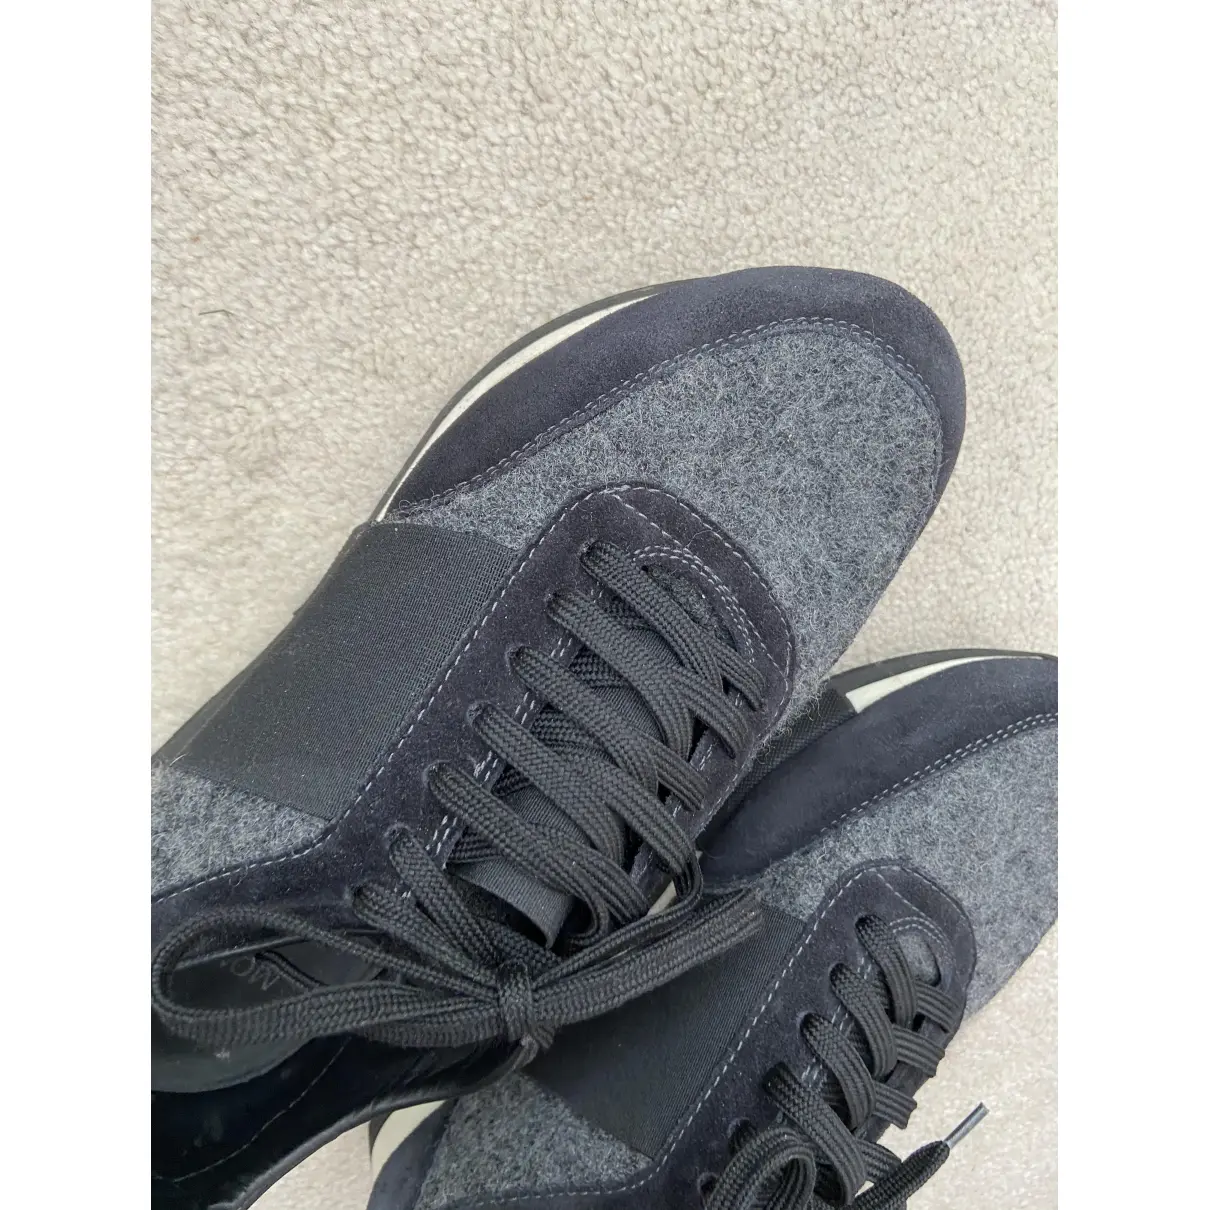 Low trainers Moncler